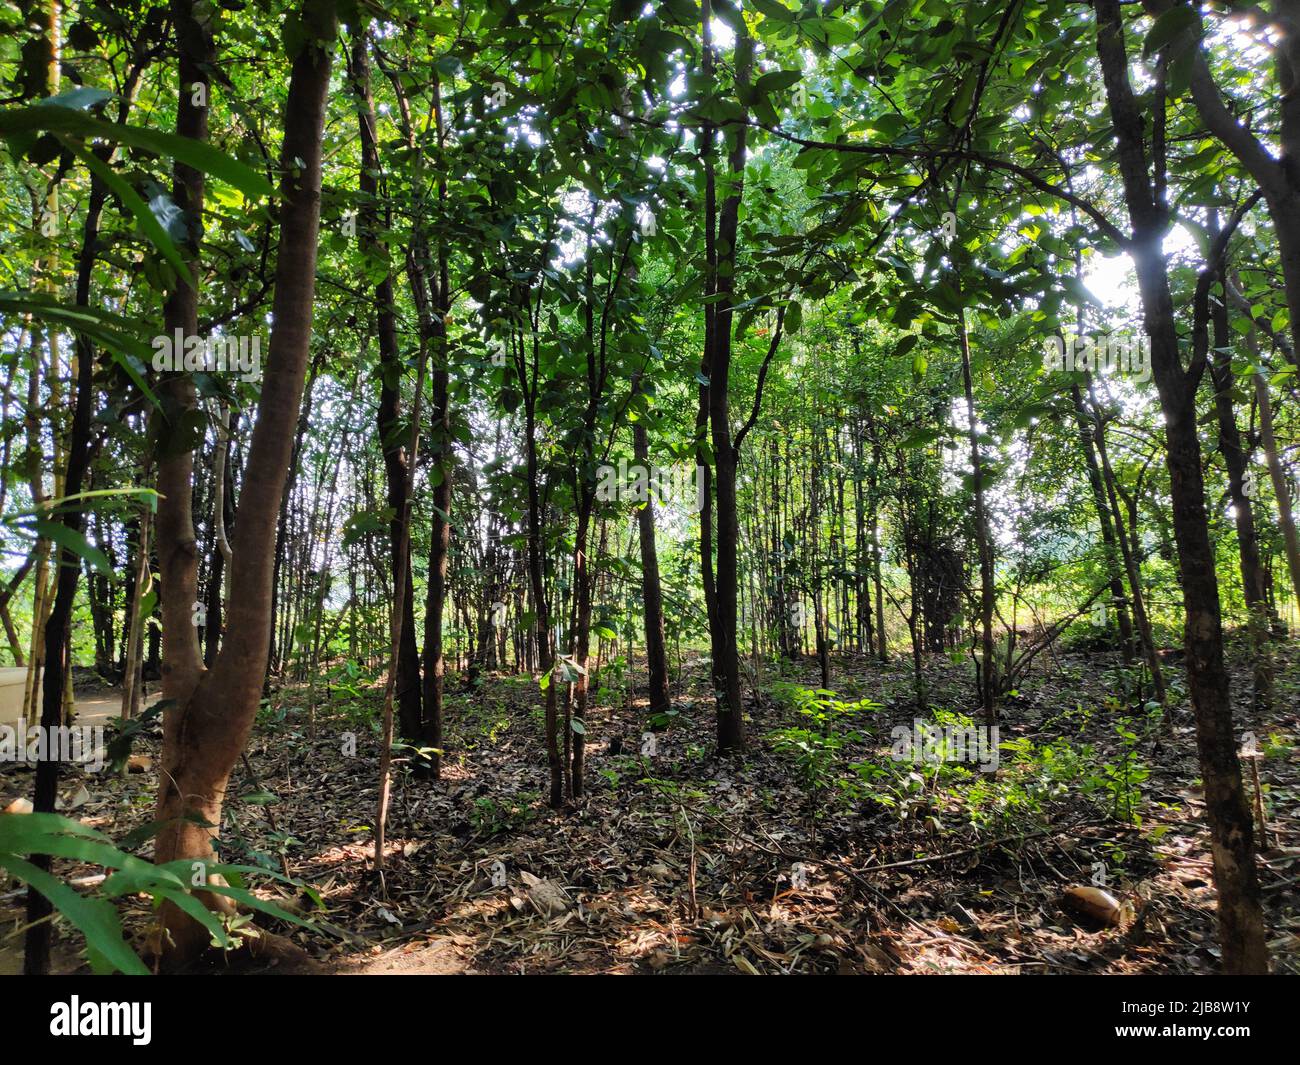 Dense tree cover in a tropical forest in Asia Stock Photo